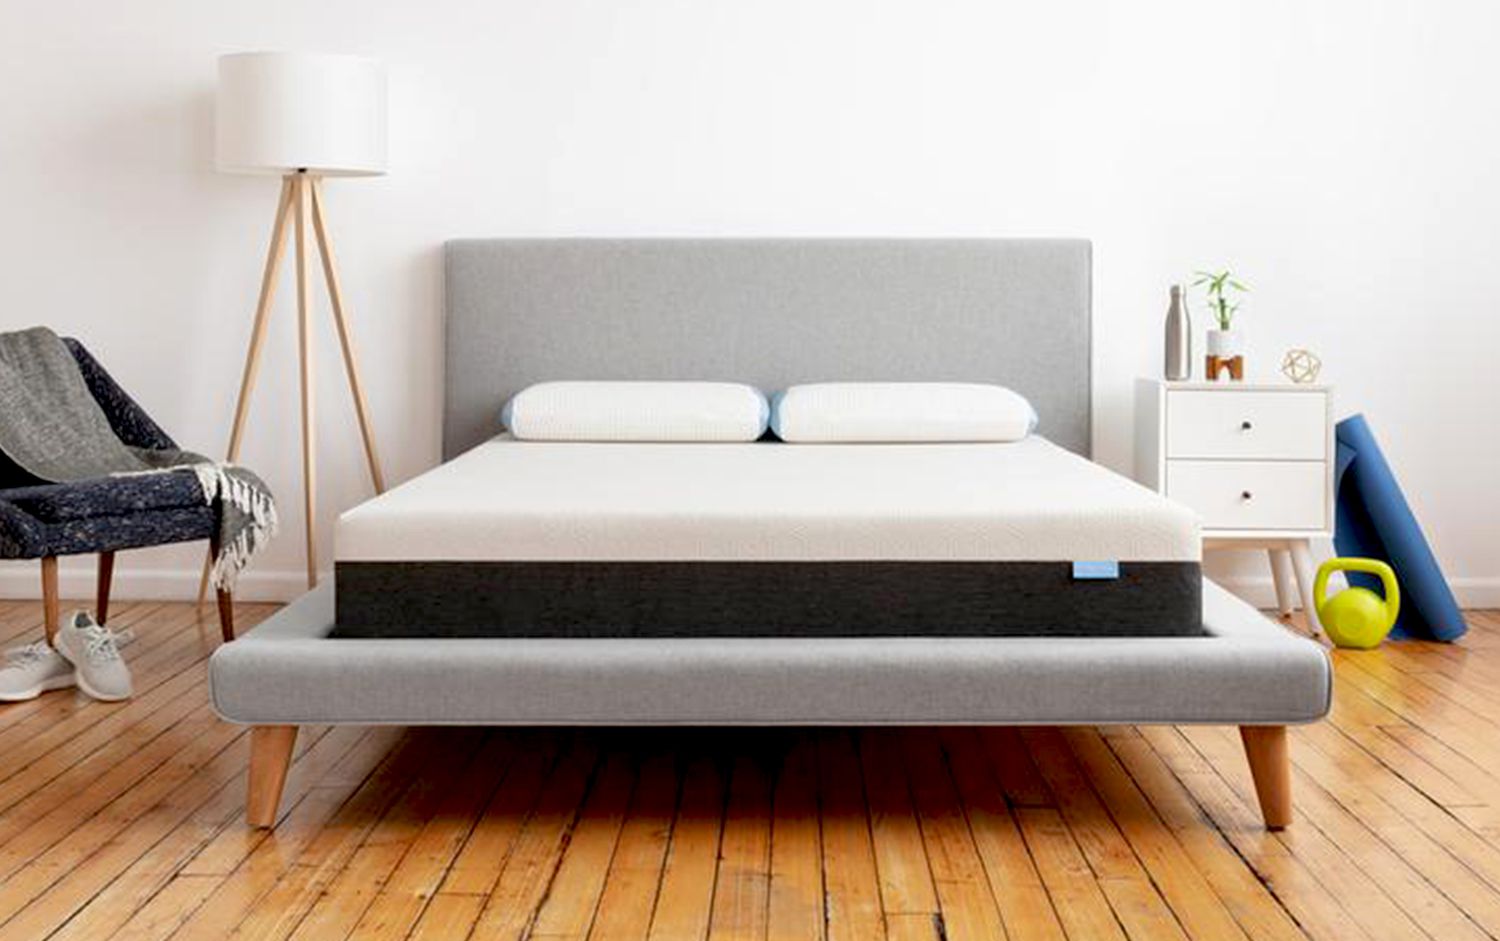 Mattress on a platform bed in a bedroom